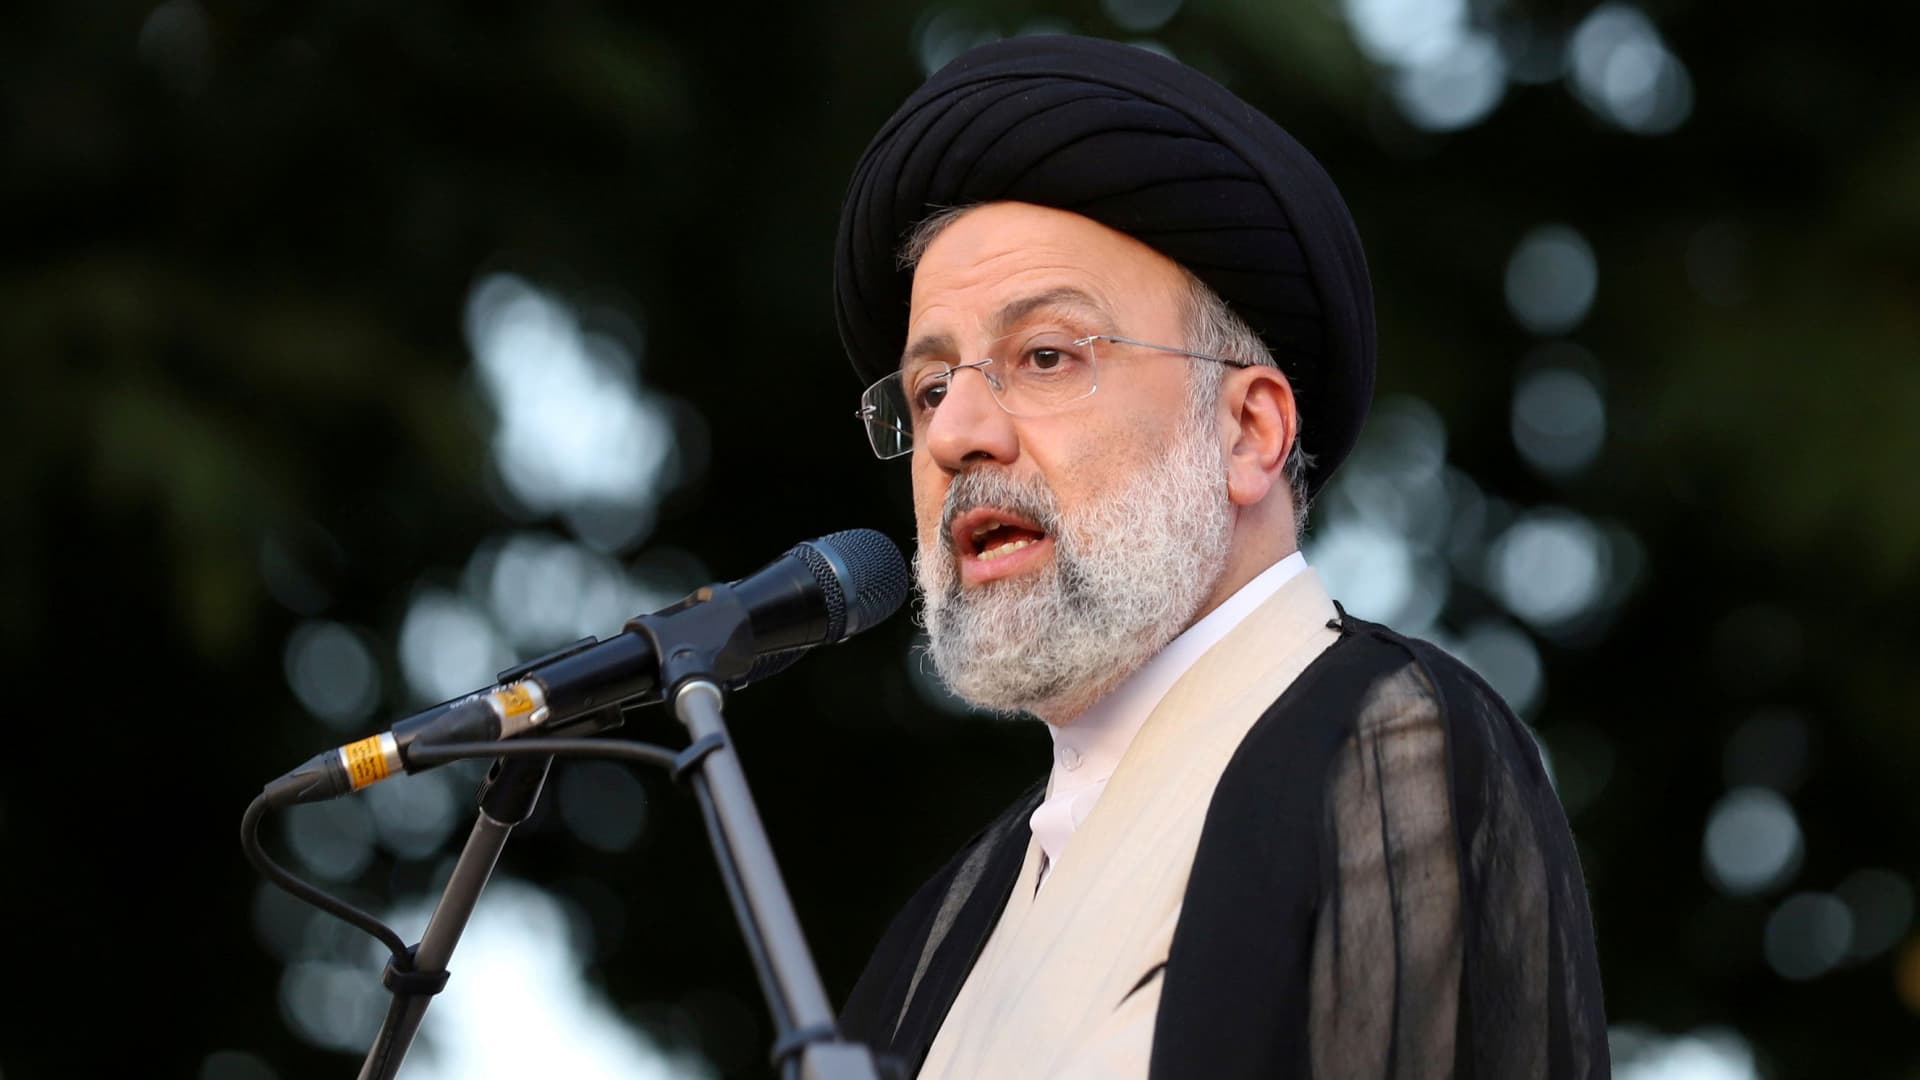 Presidential candidate Ebrahim Raisi speaks during a campaign rally in Tehran, Iran June 15, 2021.